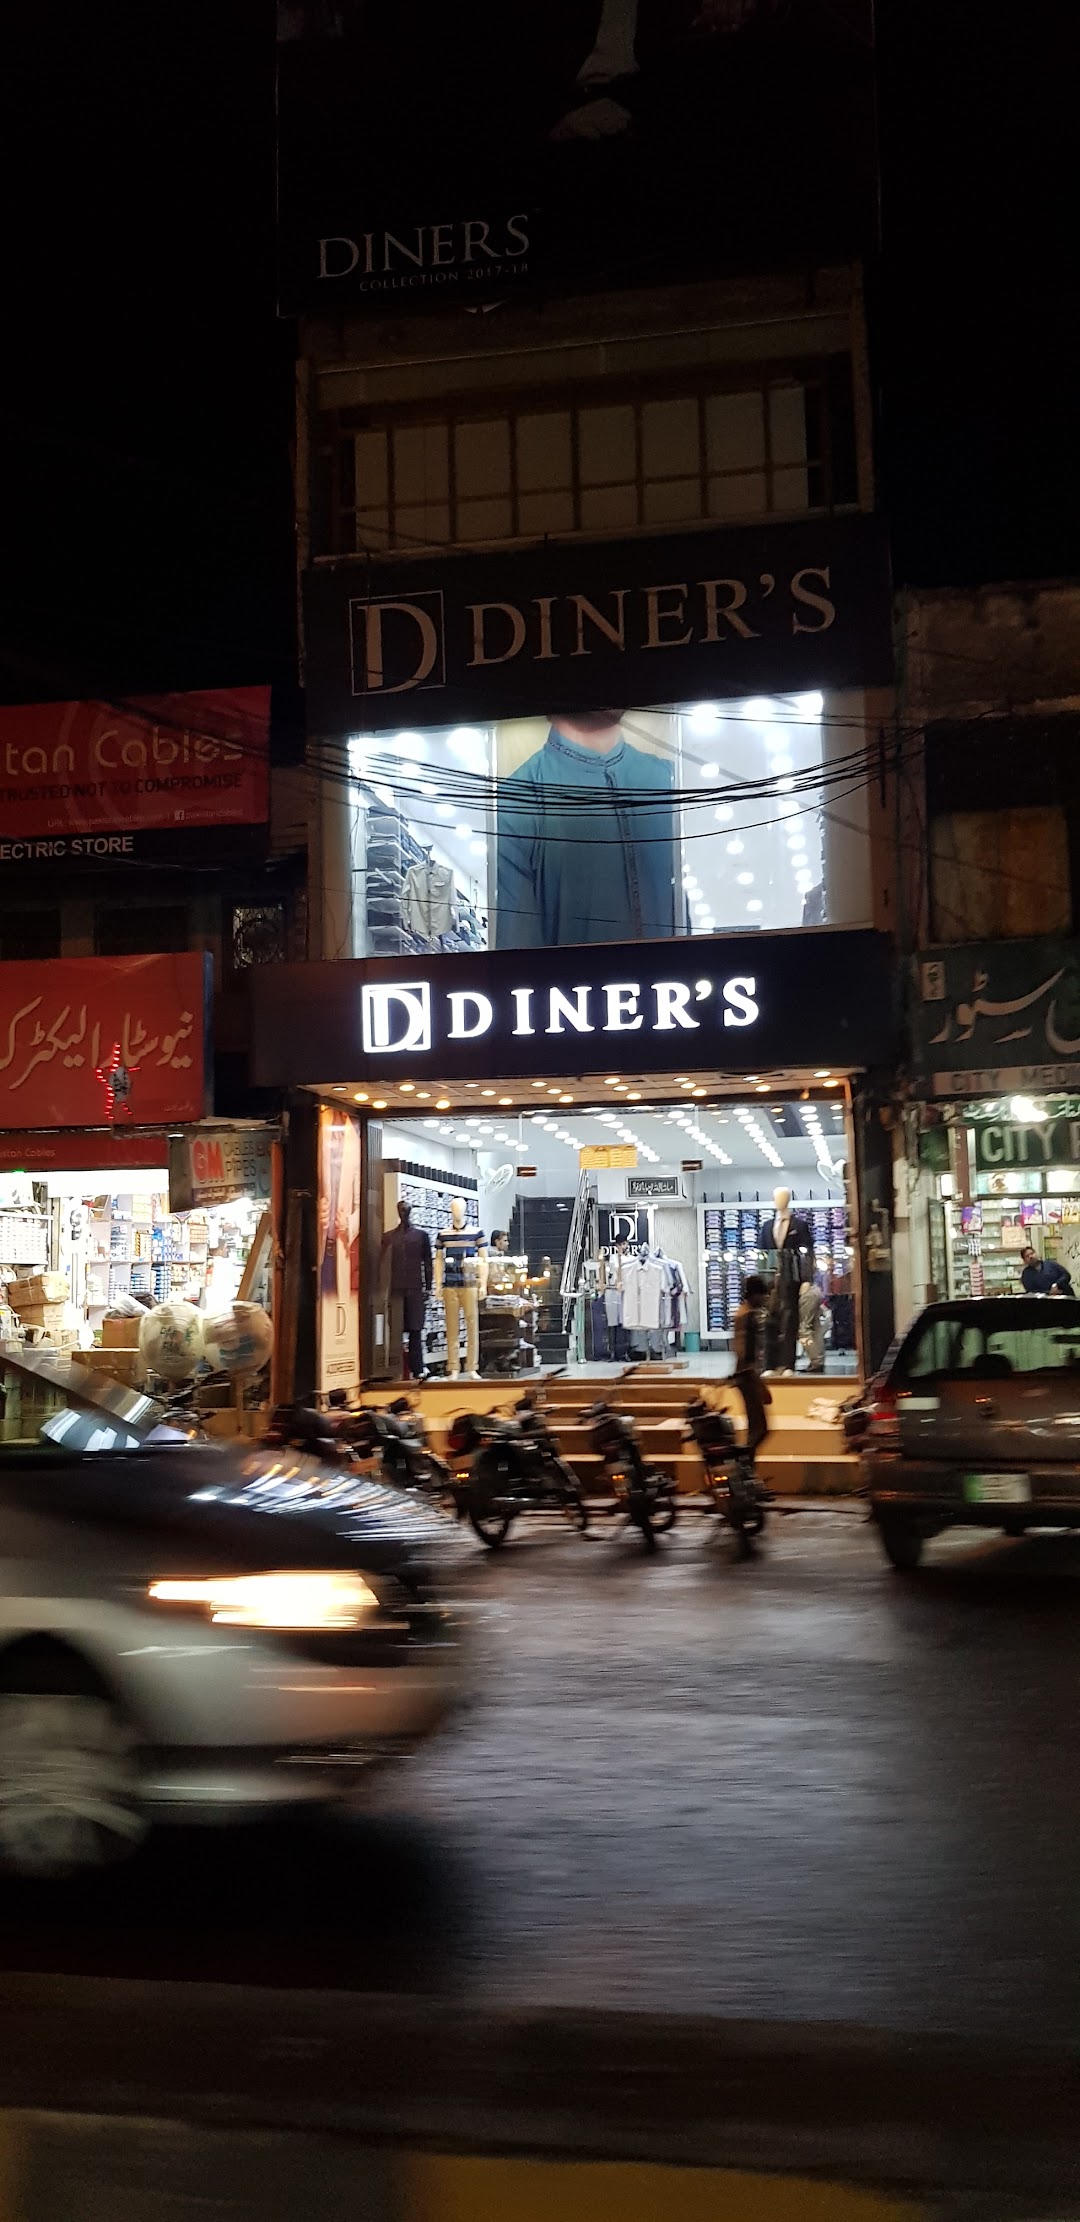 The Diners Shop